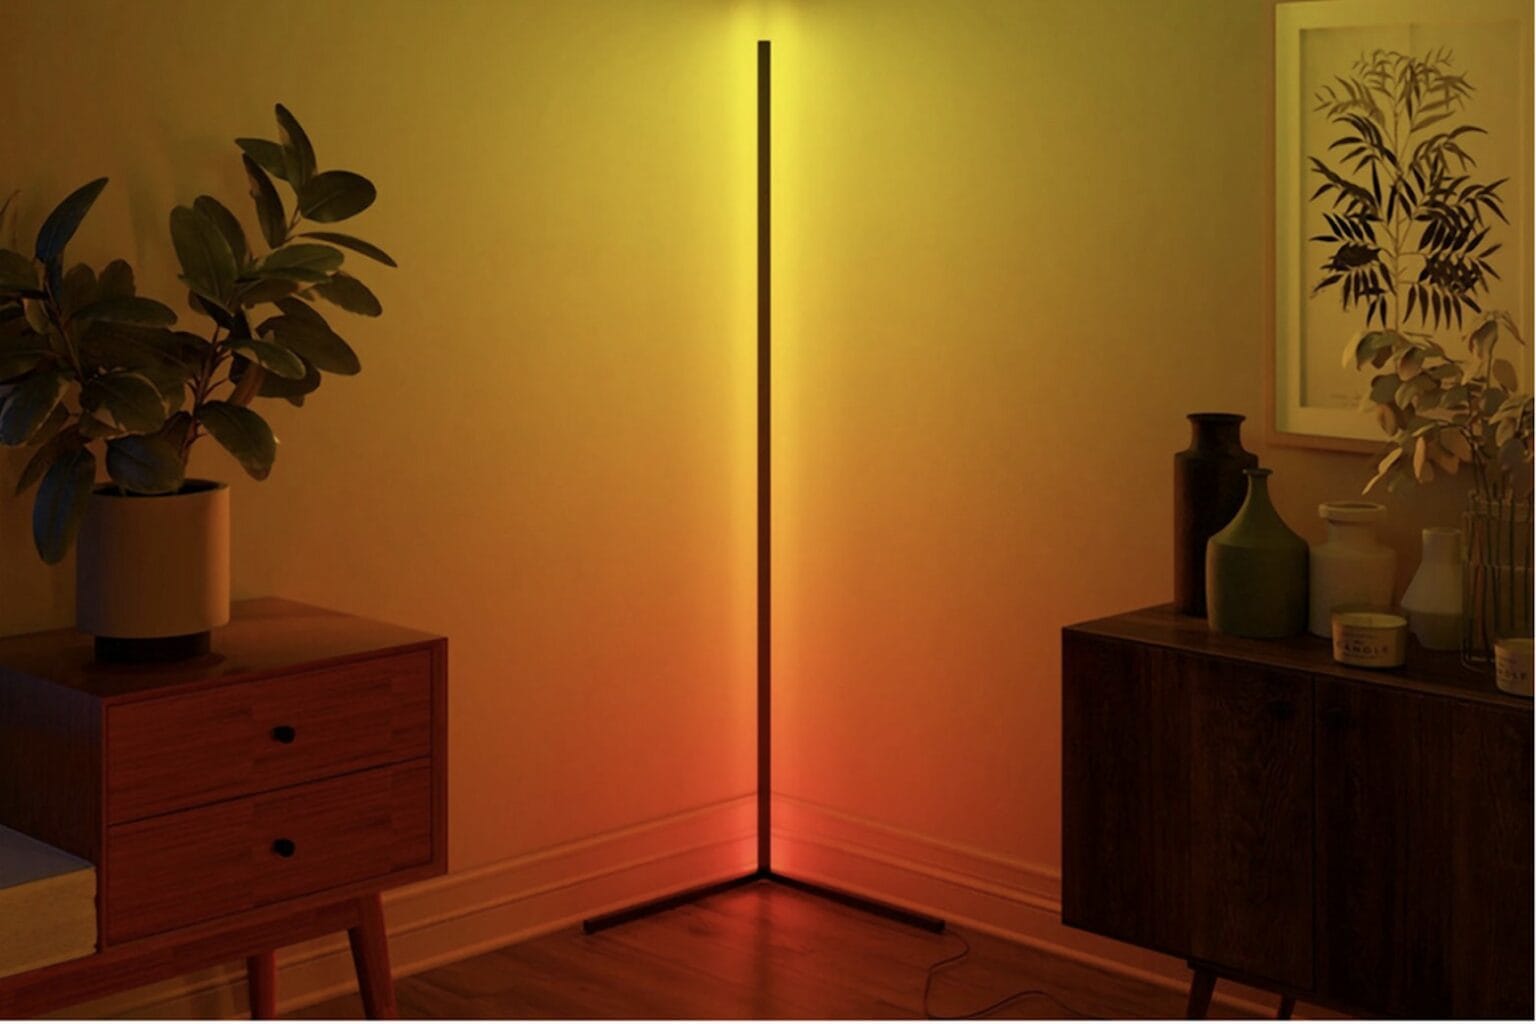 Pick up this minimalist LED corner floor lamp for a fraction of the cost during our version of Prime Day.